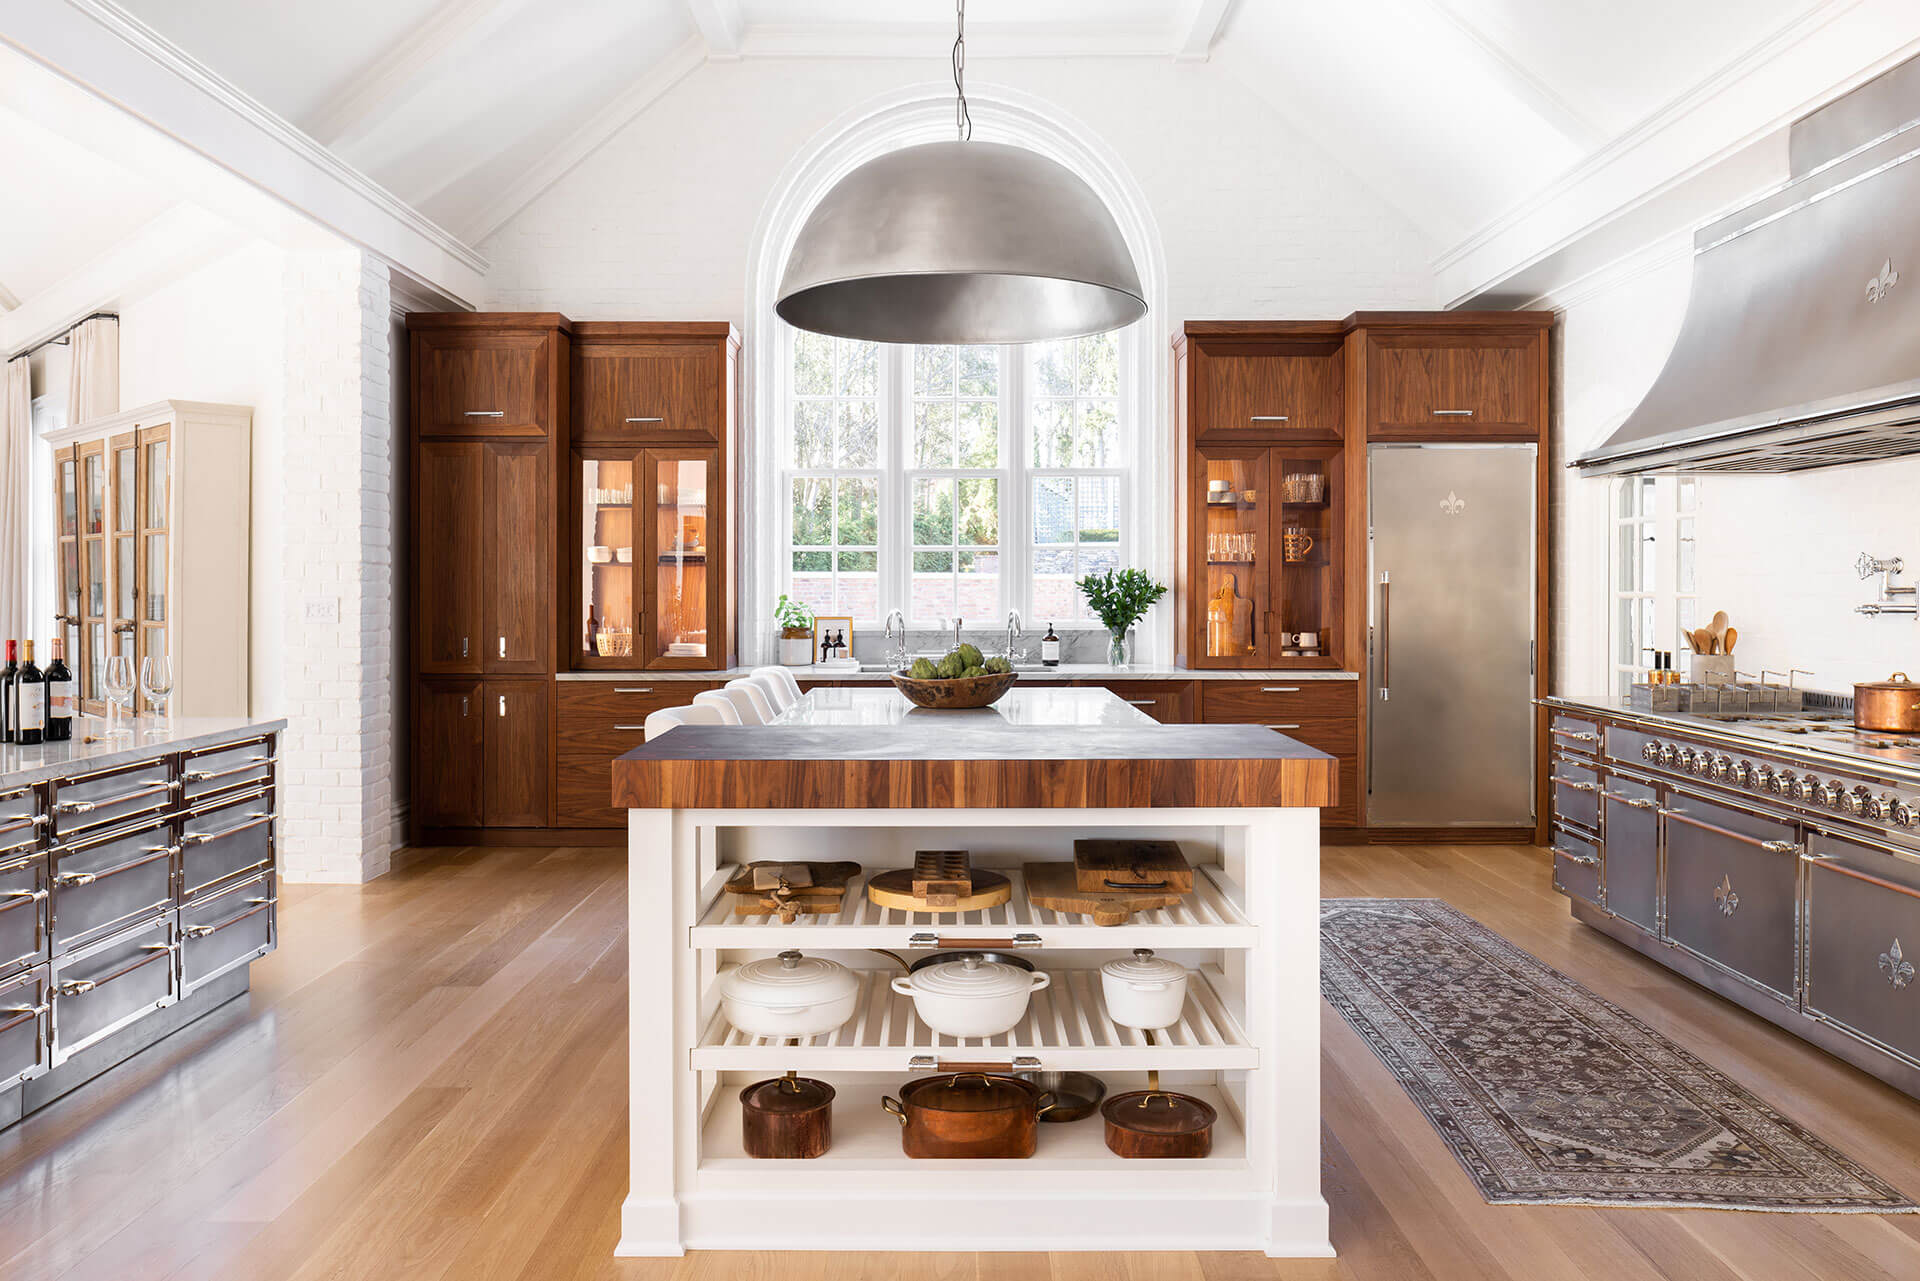 White Widows in between Wooden Kitchen Cabinets, Silver French Kitchen Ranges and Kitchen Hood